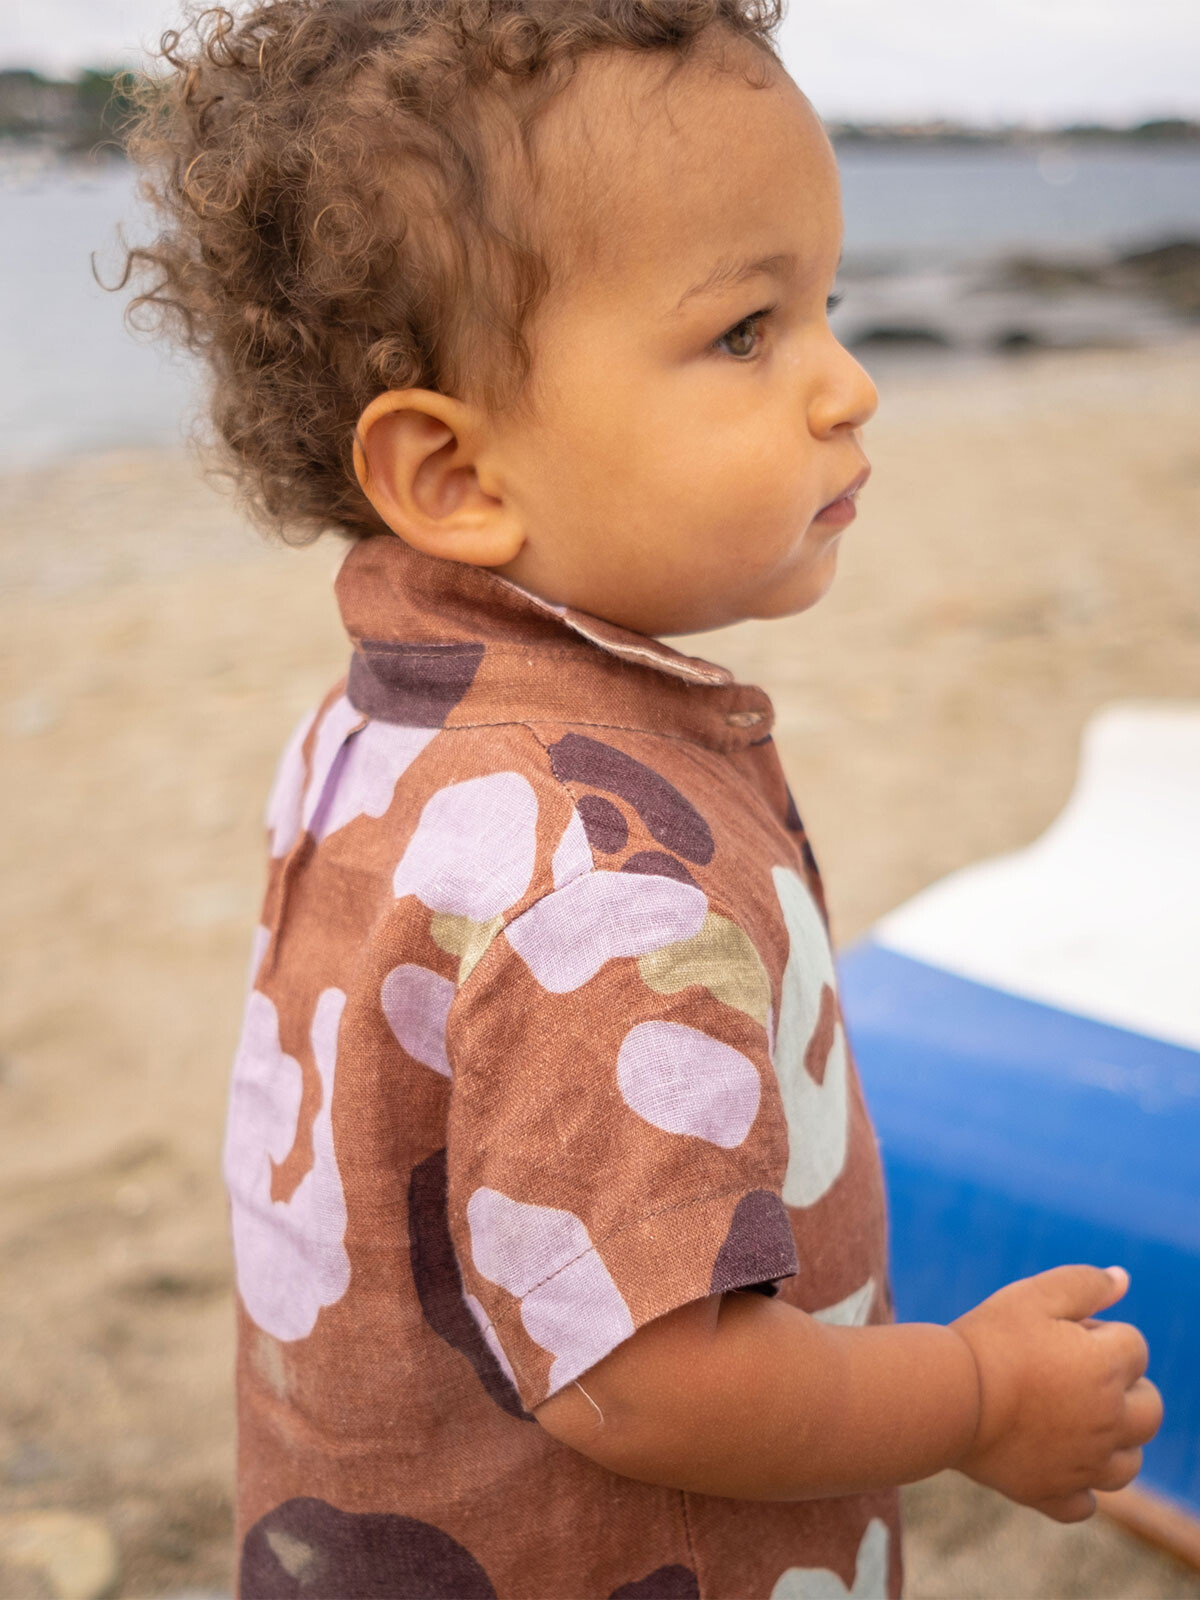 Baby linen shirtsuit SPOTTED CARAMEL